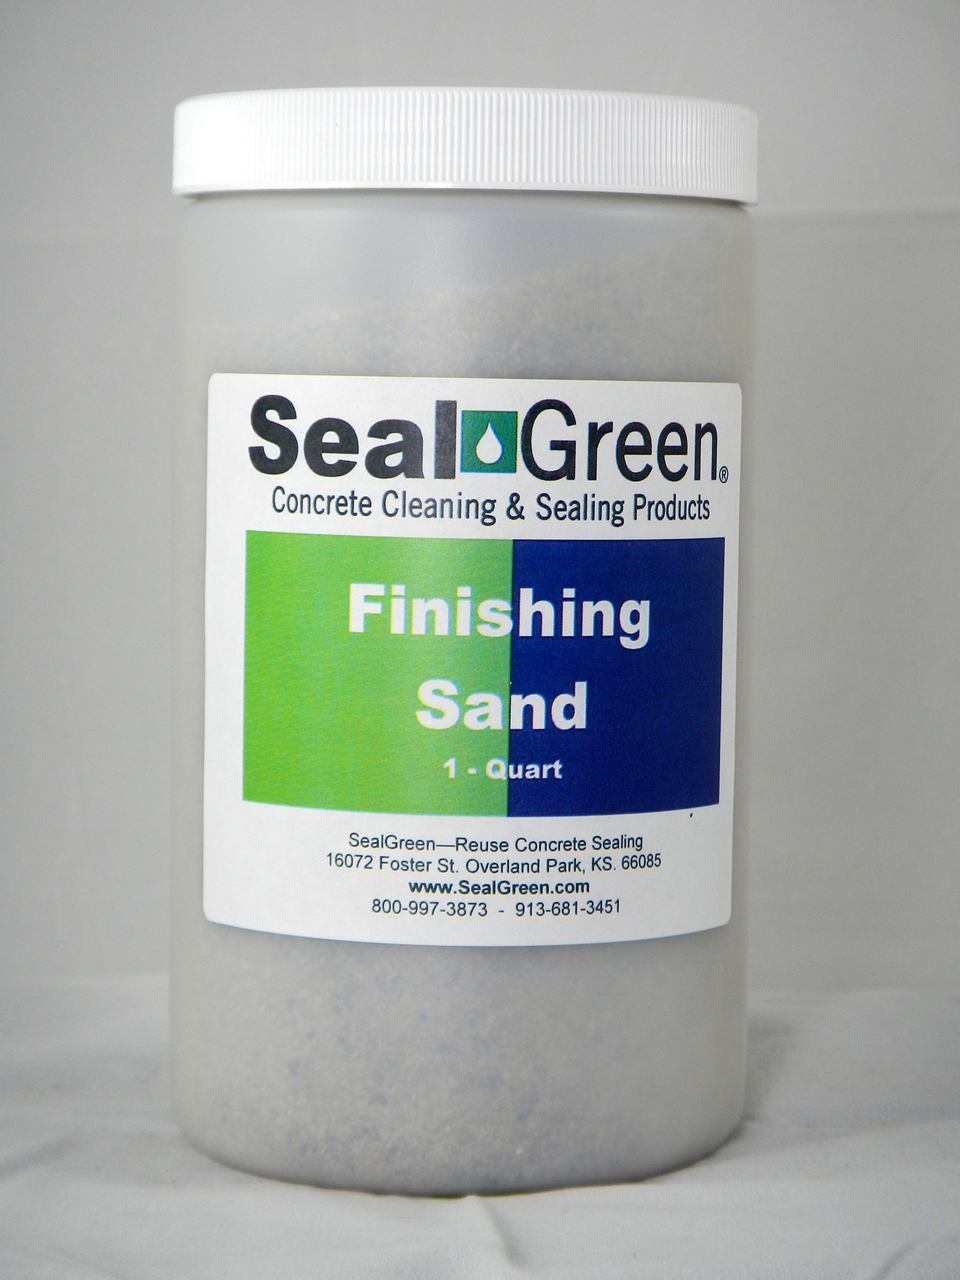 Can this Finishing Sand be used on Deck-o-Seal during the curing process?